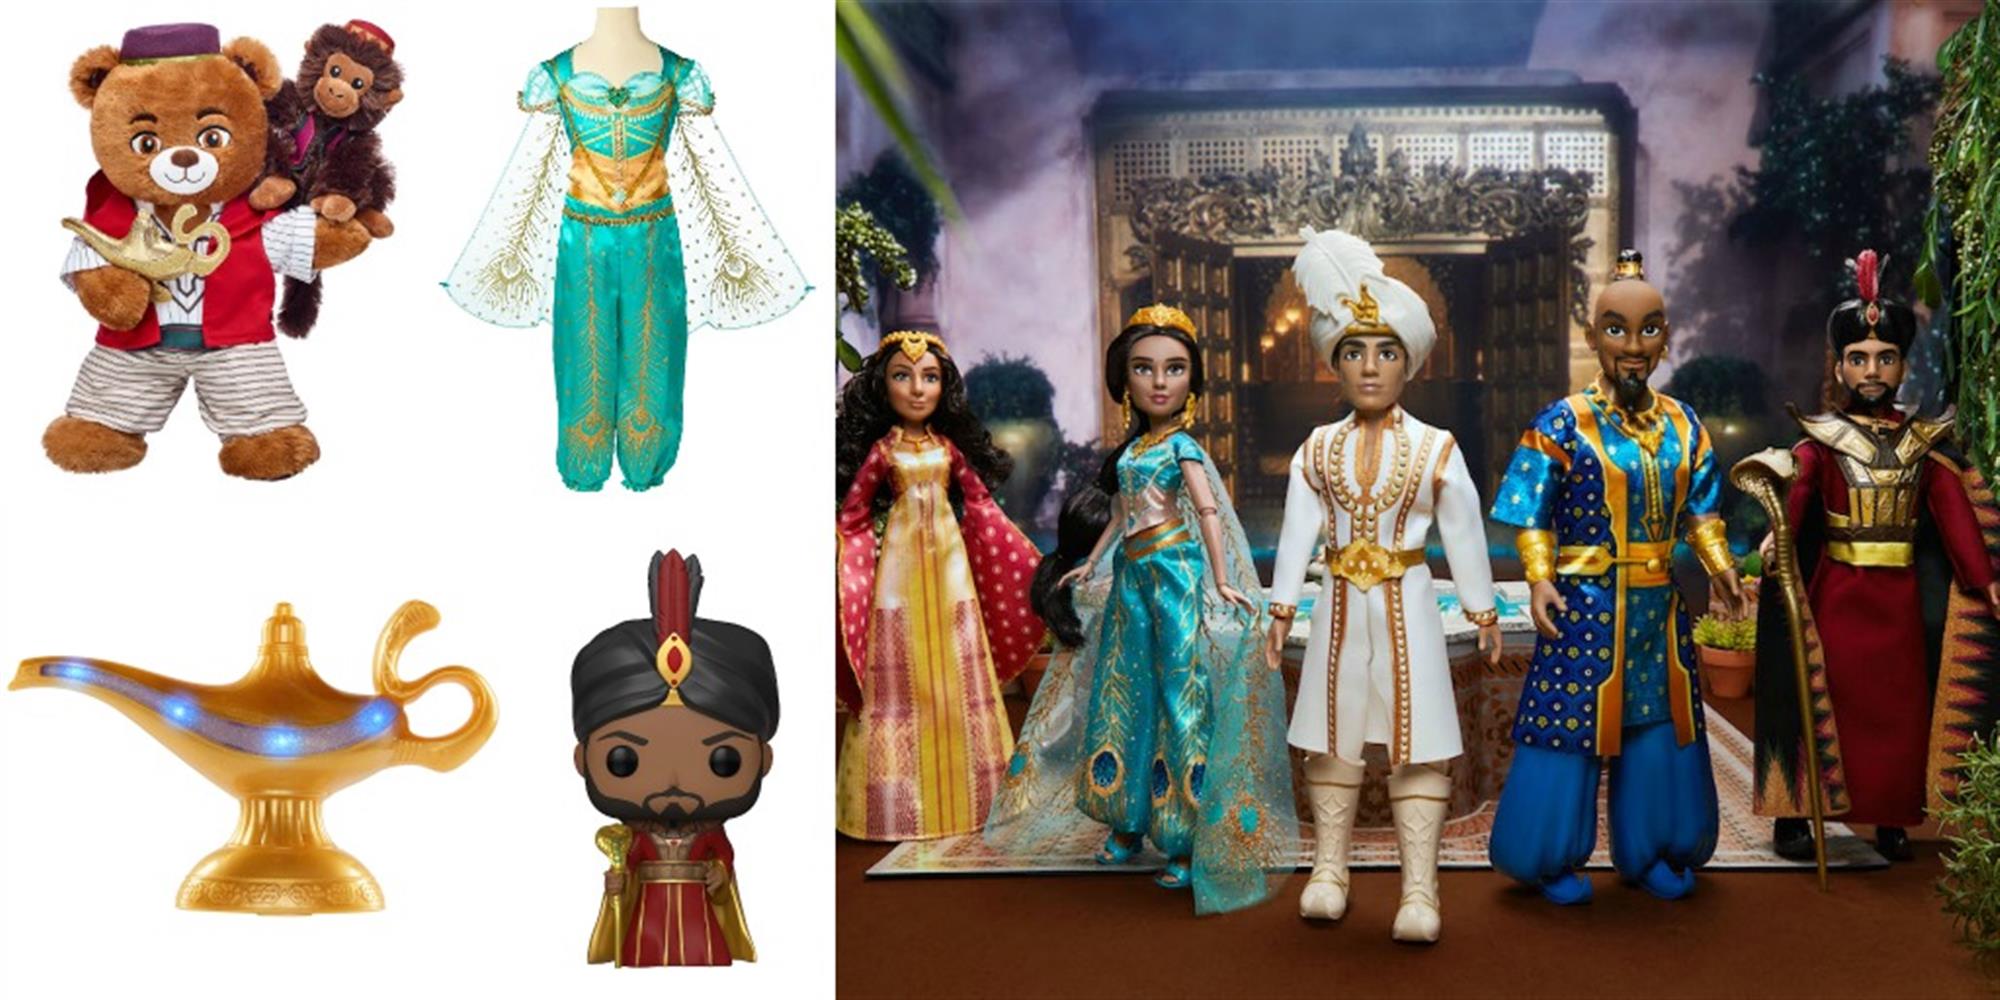 Aladdin Official Merchandise, Toys & More